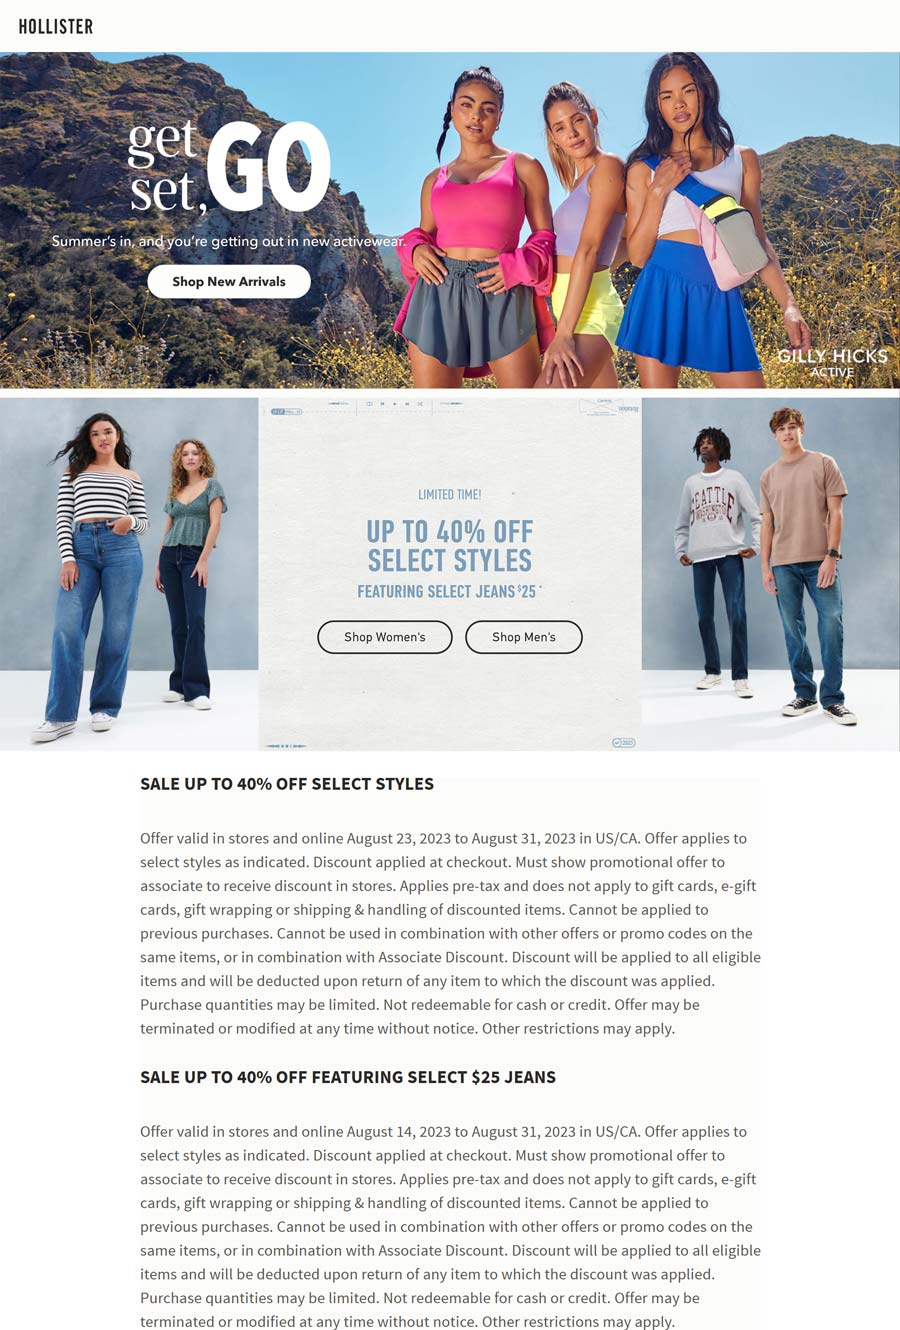 Hollister stores Coupon  Various jeans $25 & styles 40% off at Hollister #hollister 